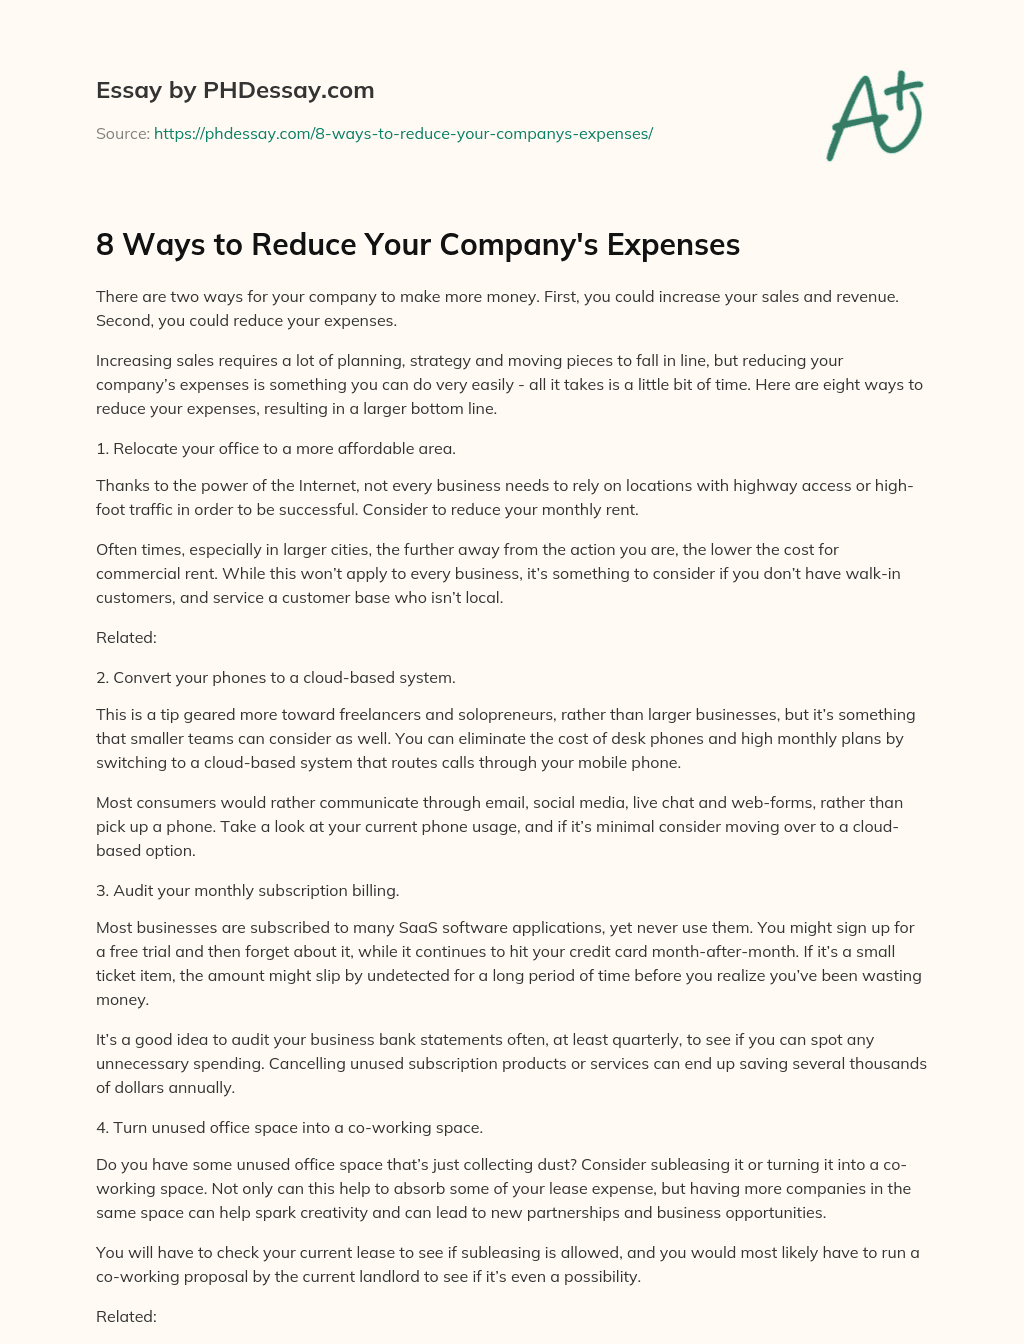 8 Ways to Reduce Your Company’s Expenses essay